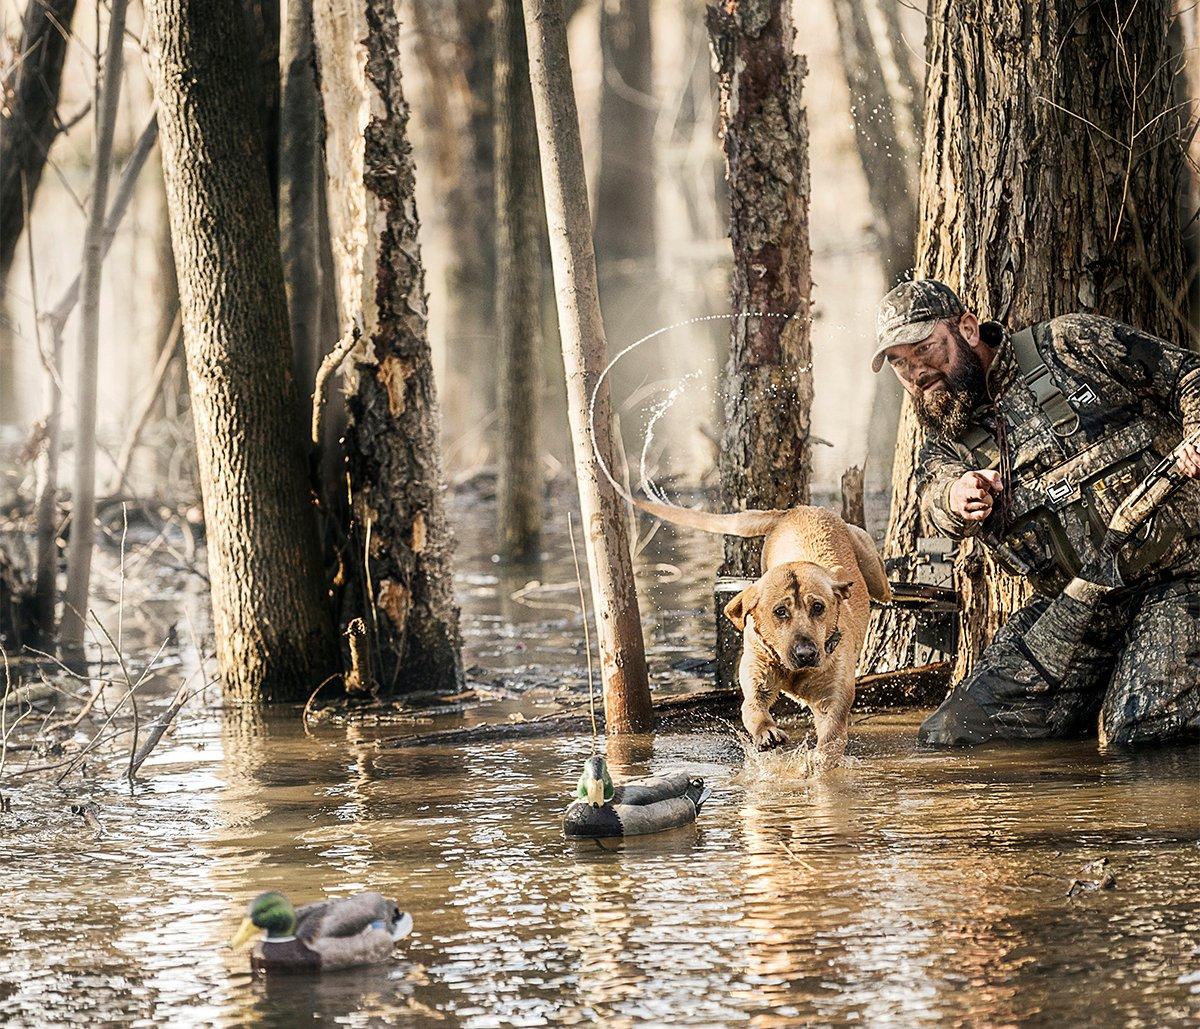 Try to capture little details and moments that tell the story of a hunt. Photo by Bill Konway